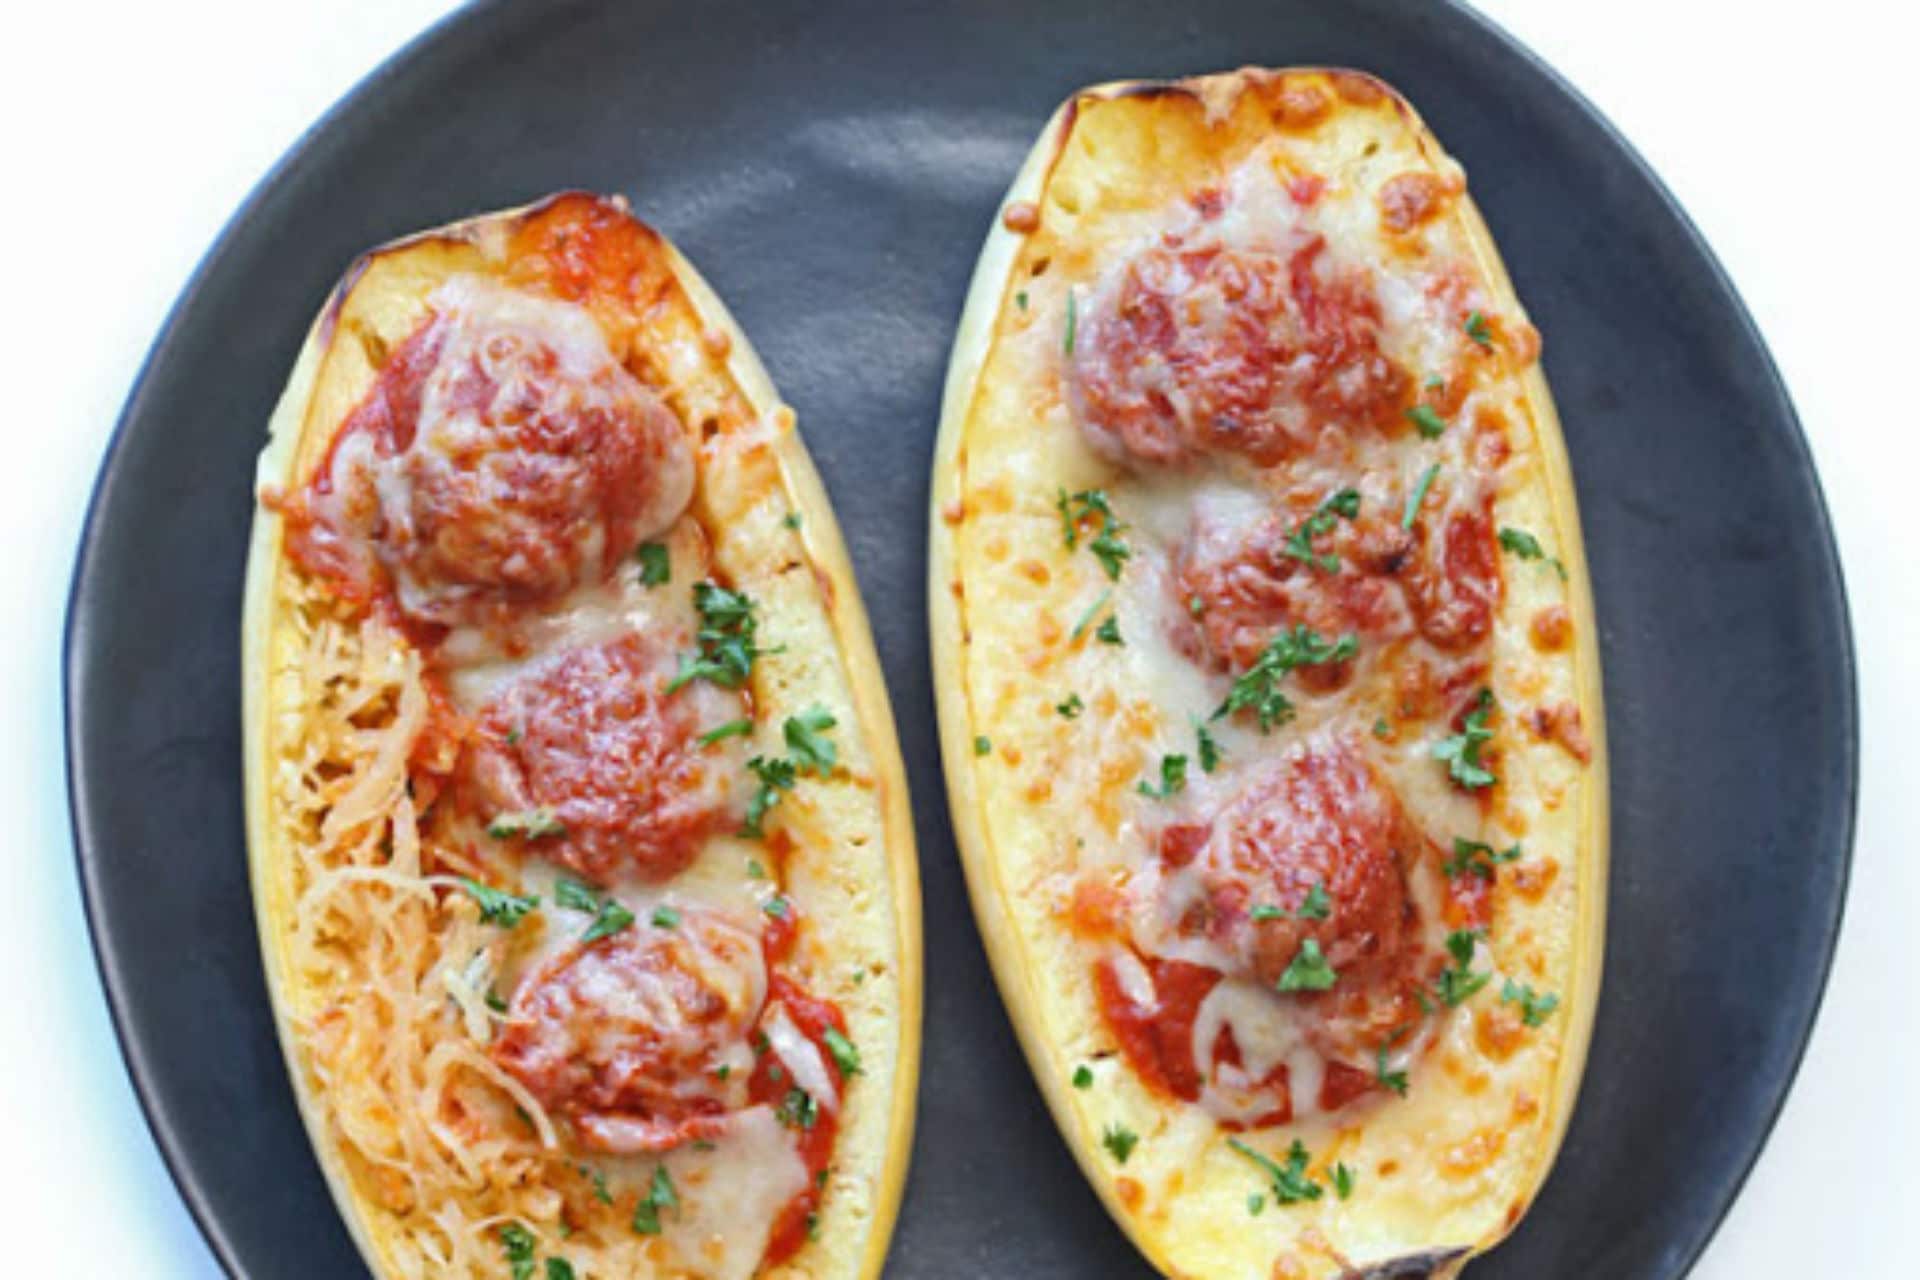 plate of spaghetti squash filled with tomato sauce and meatballs